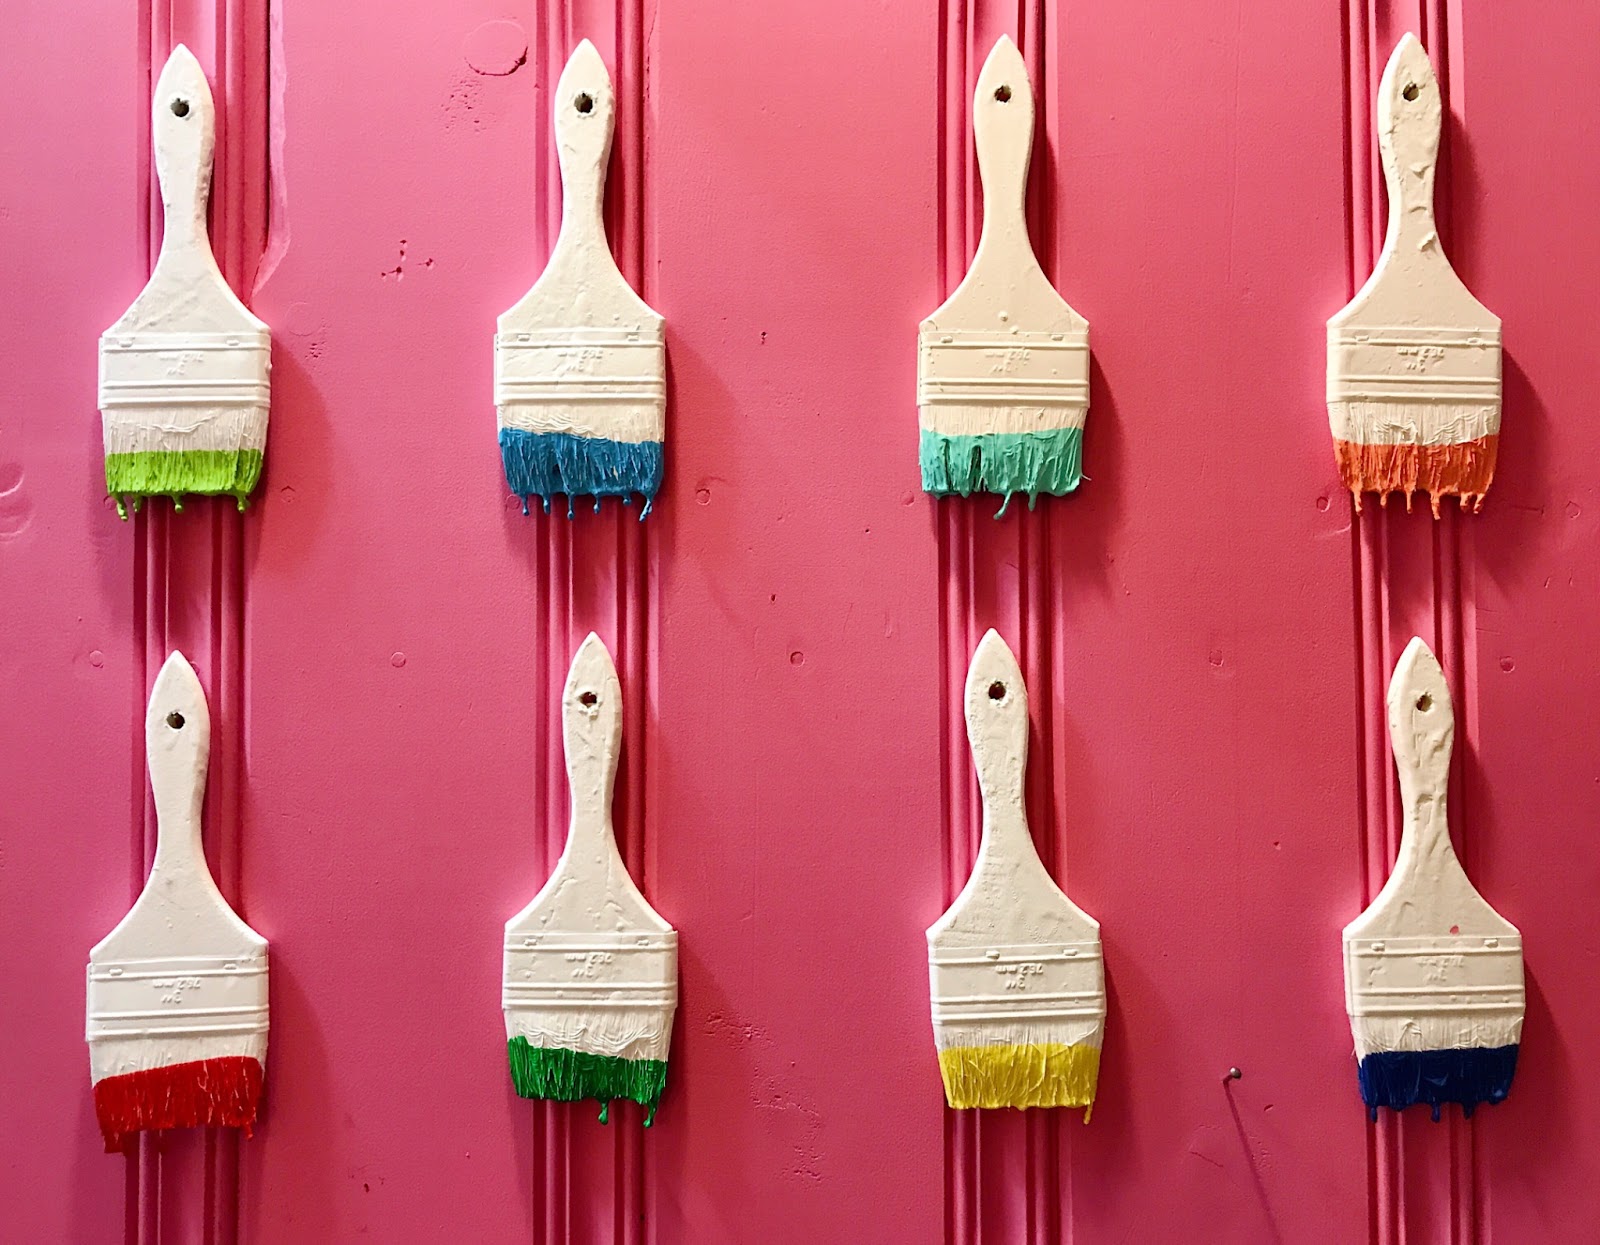 Paint brushes laid out, dipped in various colors. 